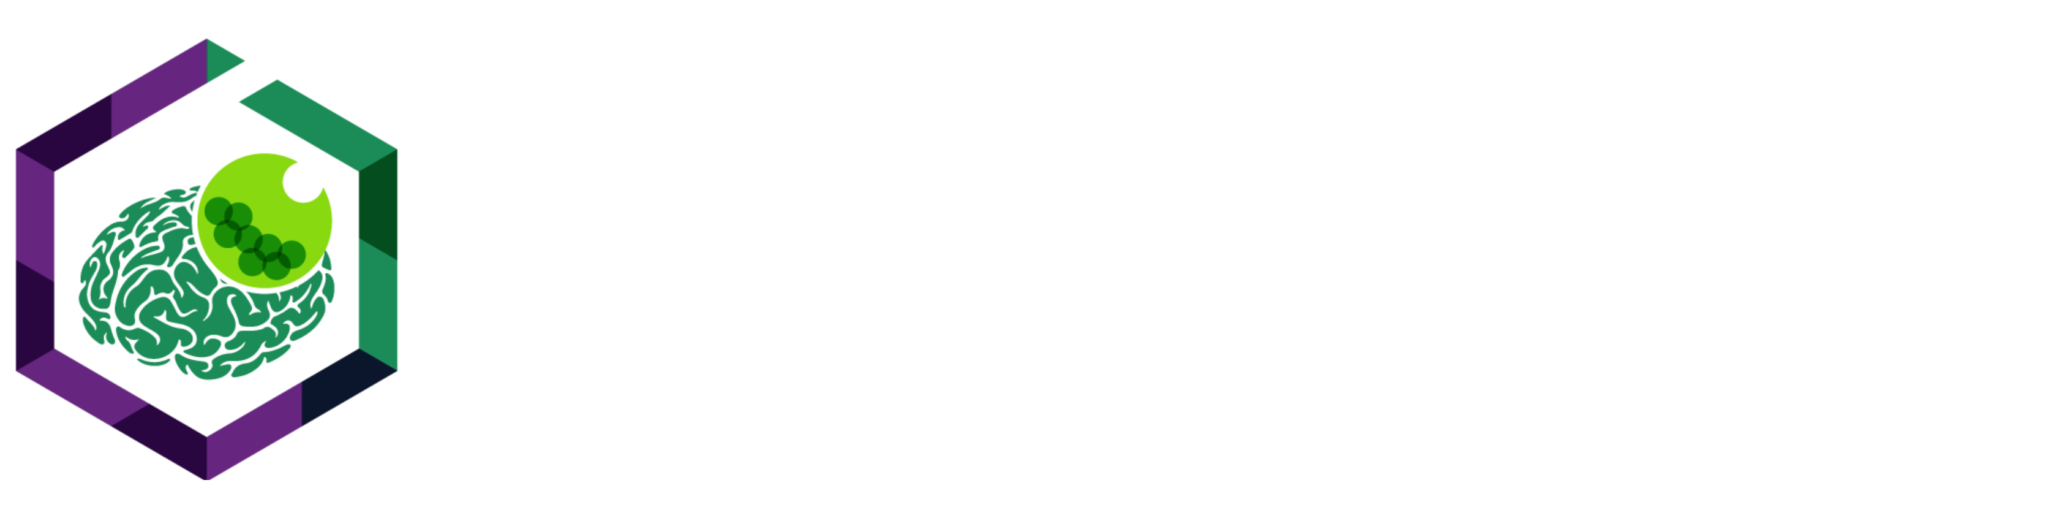 Protein-Degradation-for-CNS-Summit-2048x518